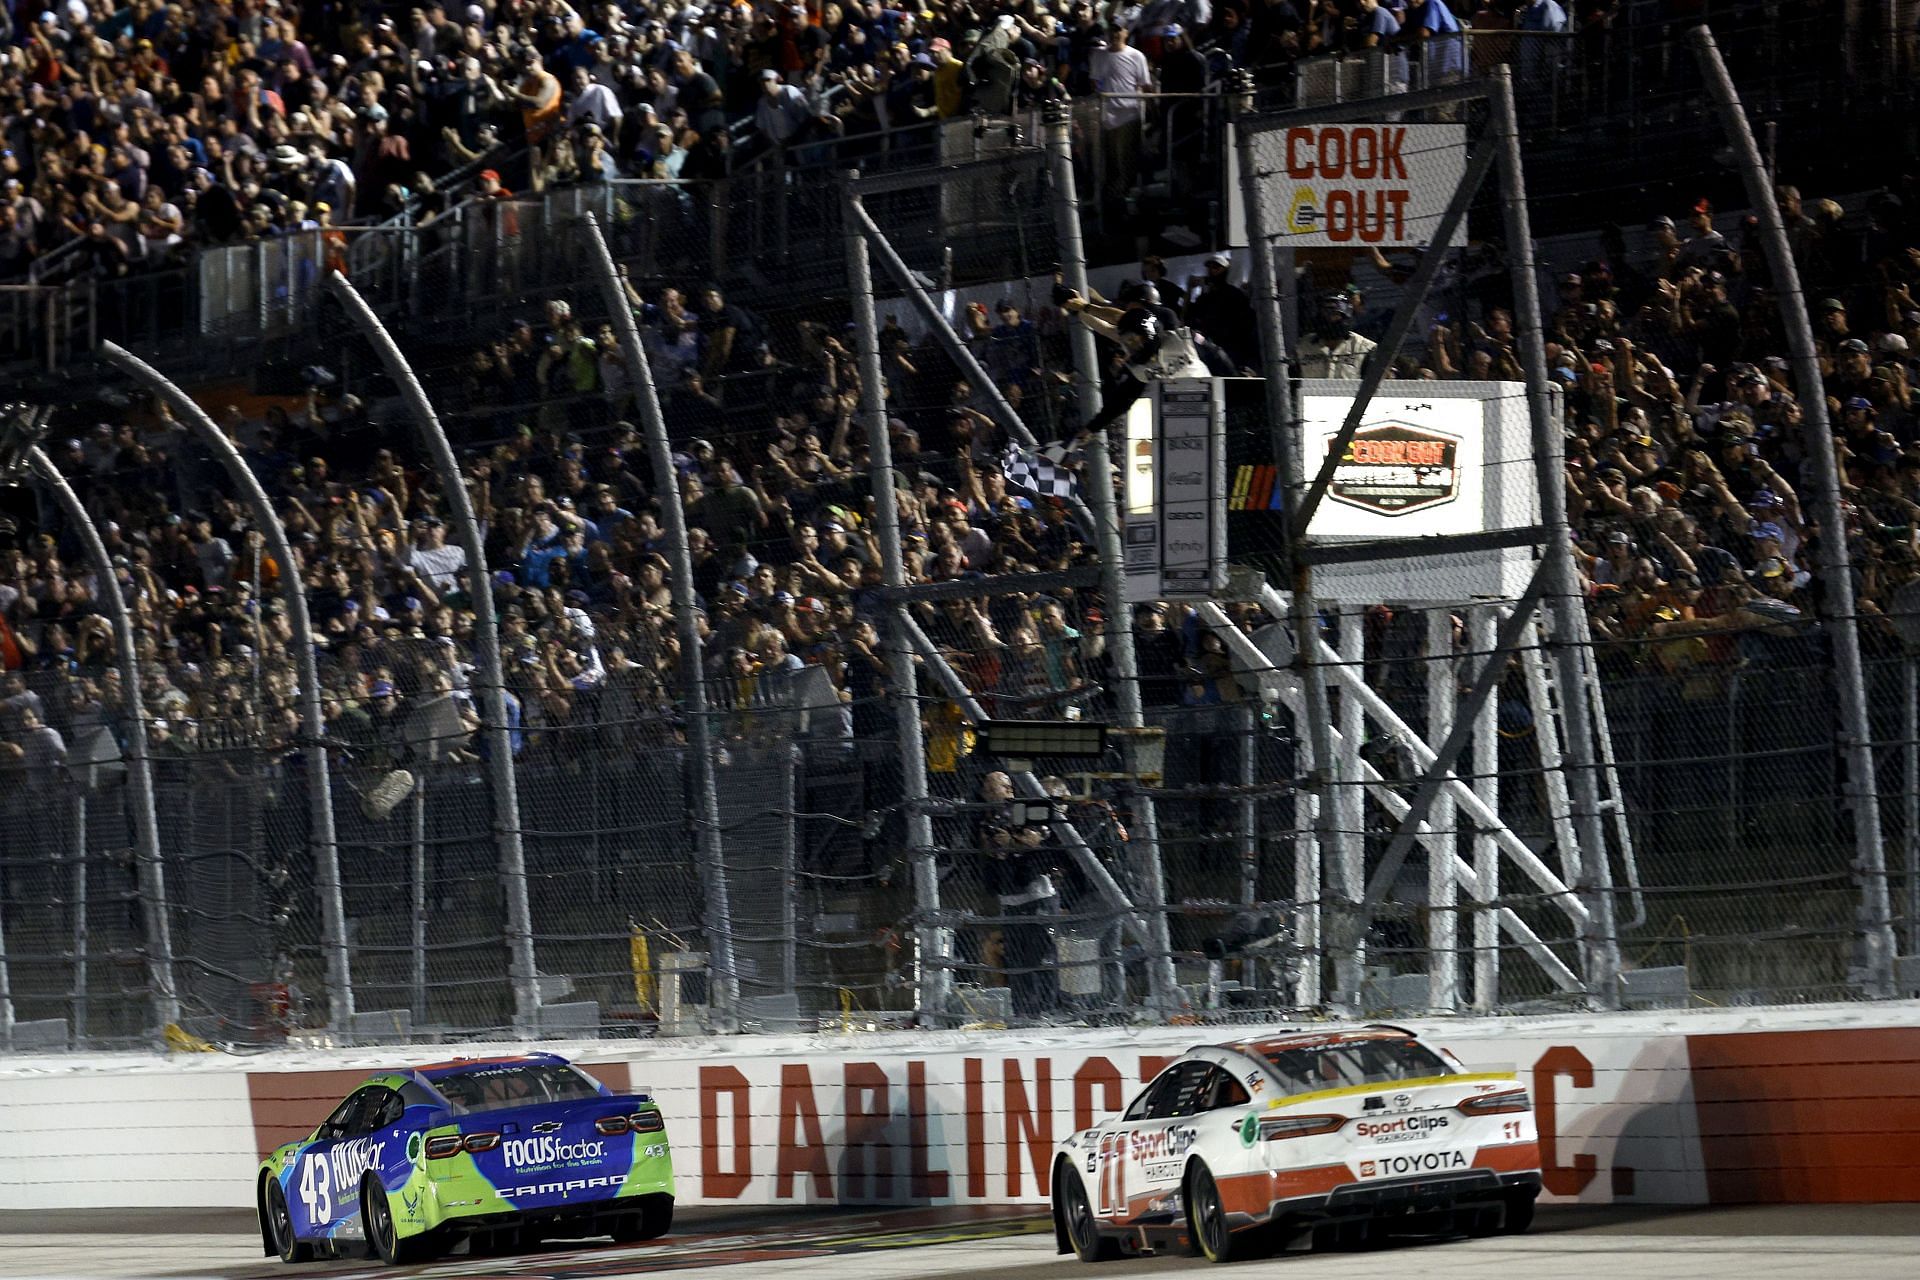 NASCAR: Darlington Preview, Predictions, and How to Watch